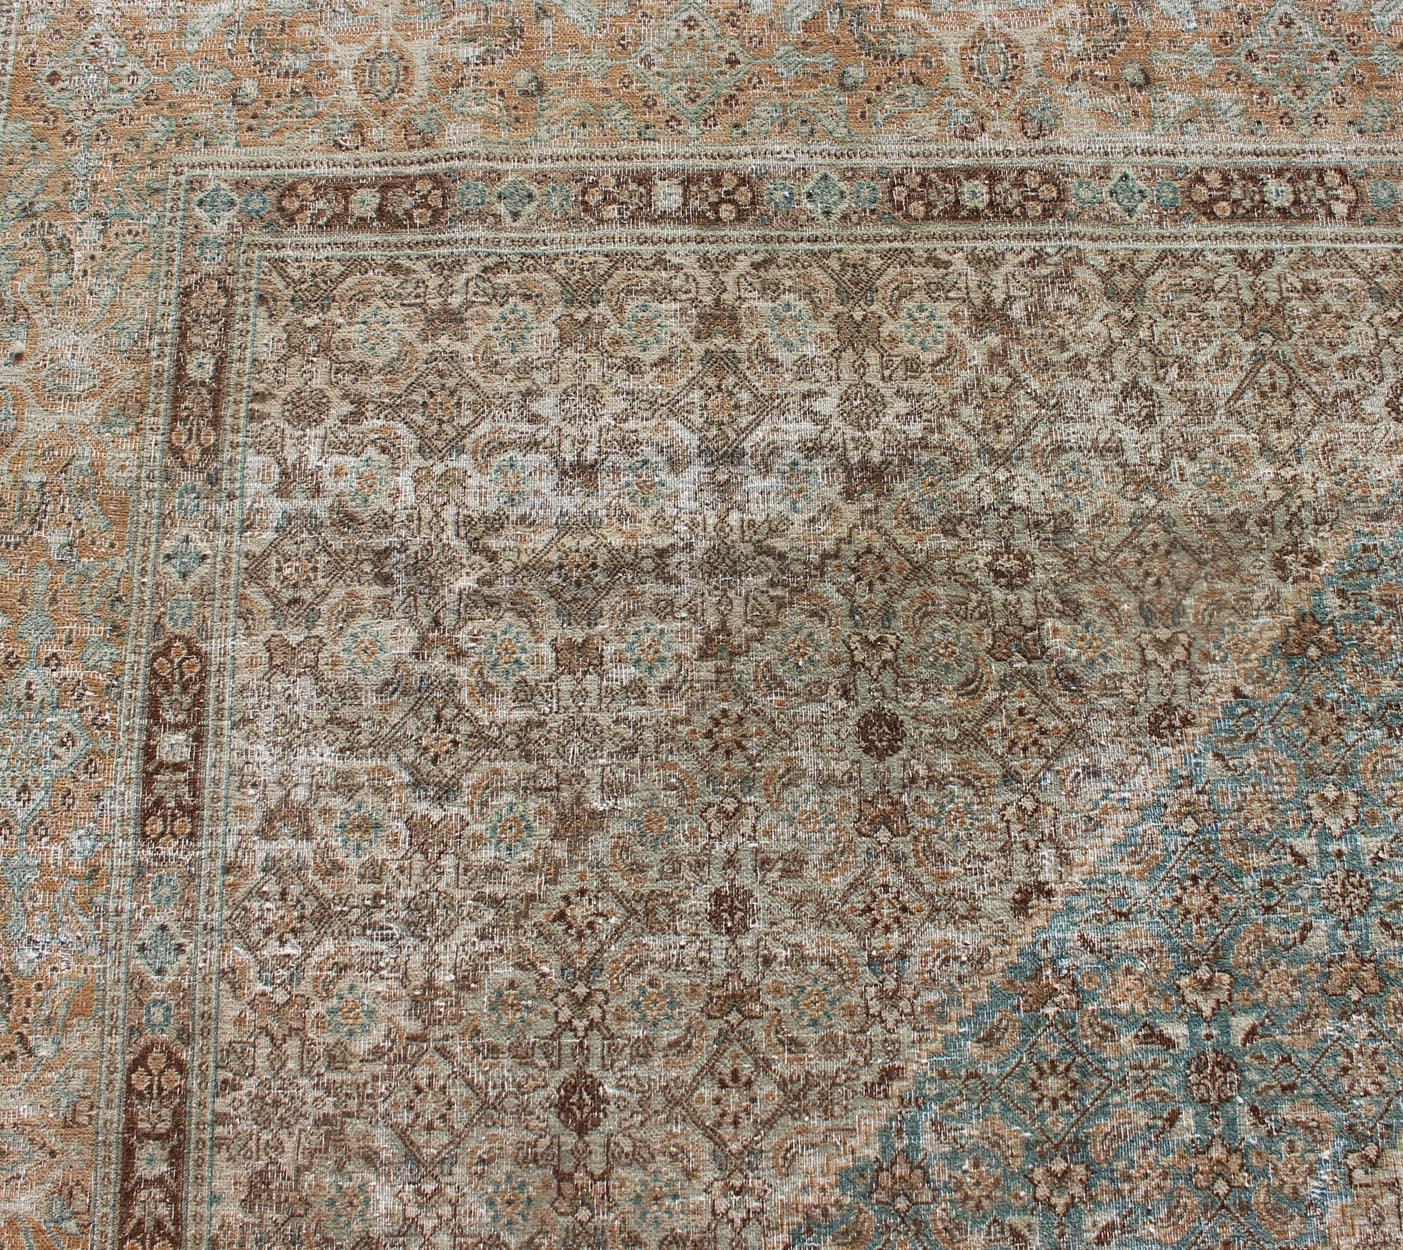 Antique Persian Khorassan Rug with a Geometric Diamond Design in Teal and Brown For Sale 7